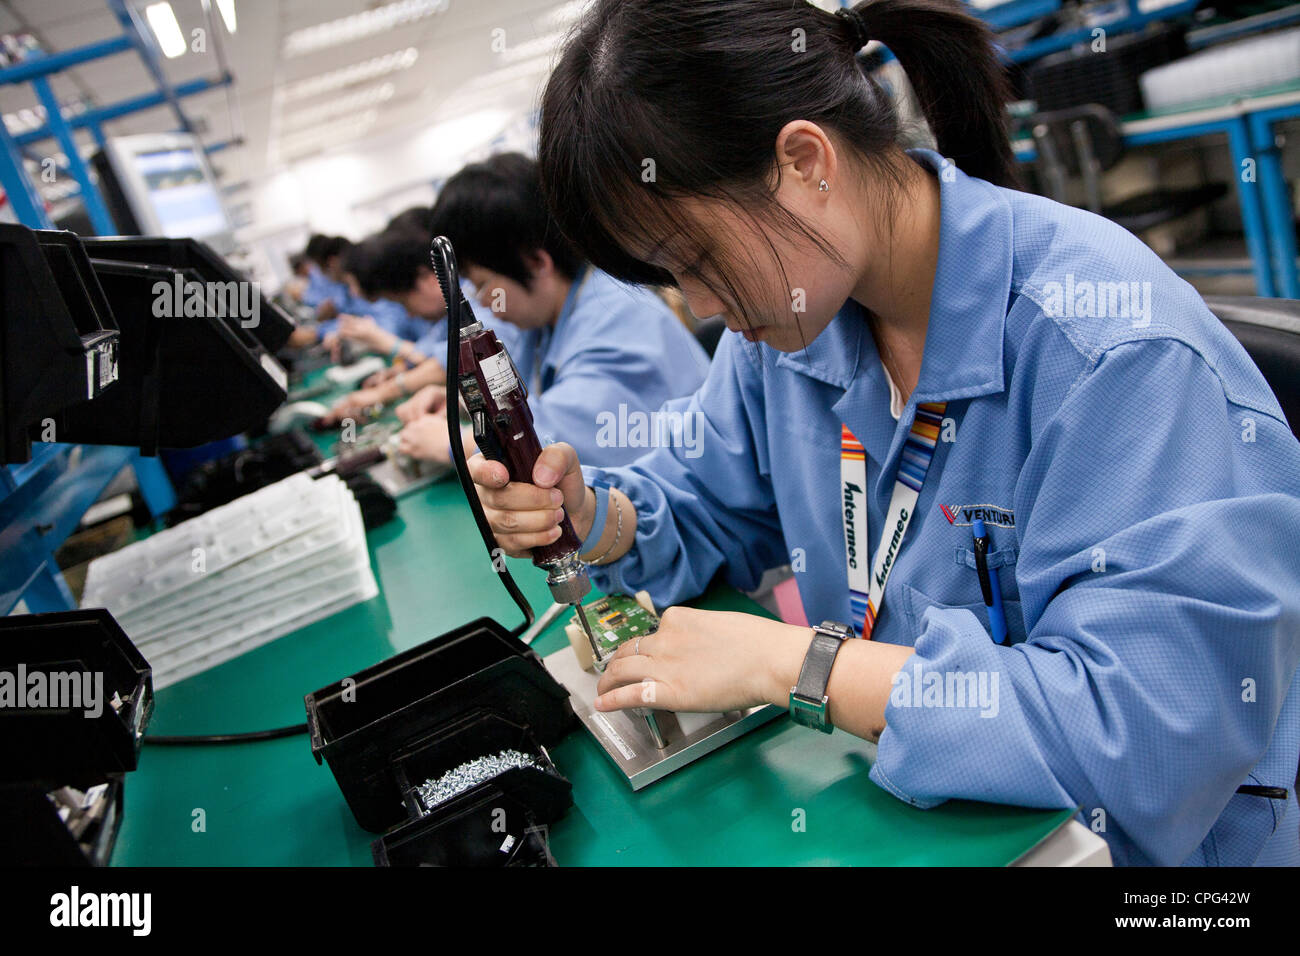 Workers assemble hand-held inventory computer devices on the assembly line at the Venture Corp. factory in Singapore Stock Photo